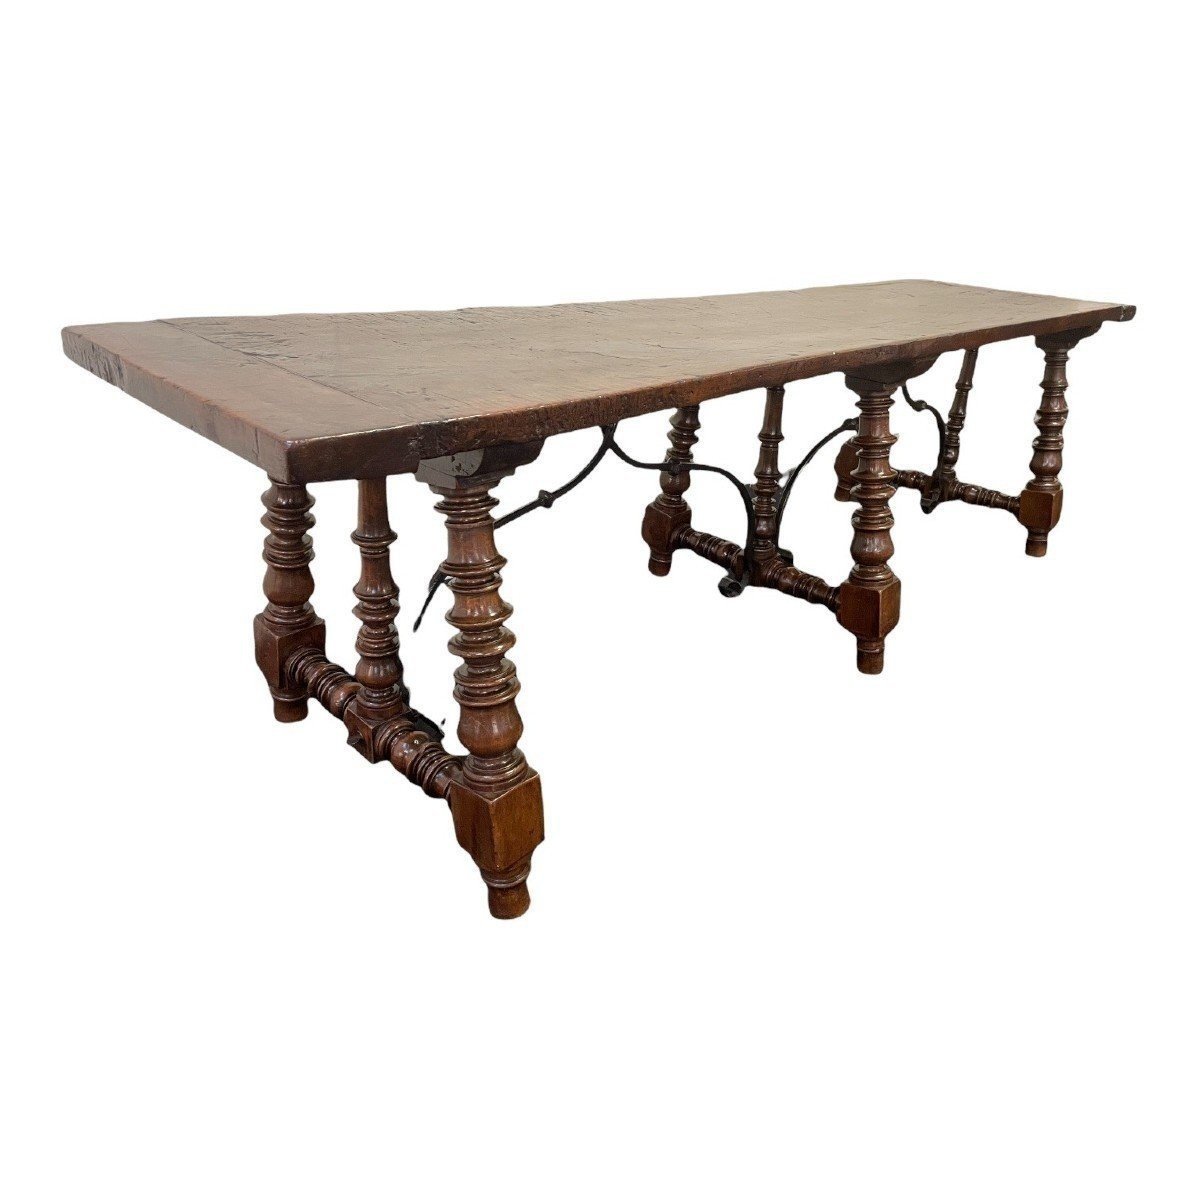 Large Spanish Table With 6 Legs In Walnut 17thc. (266 Cm).-photo-2